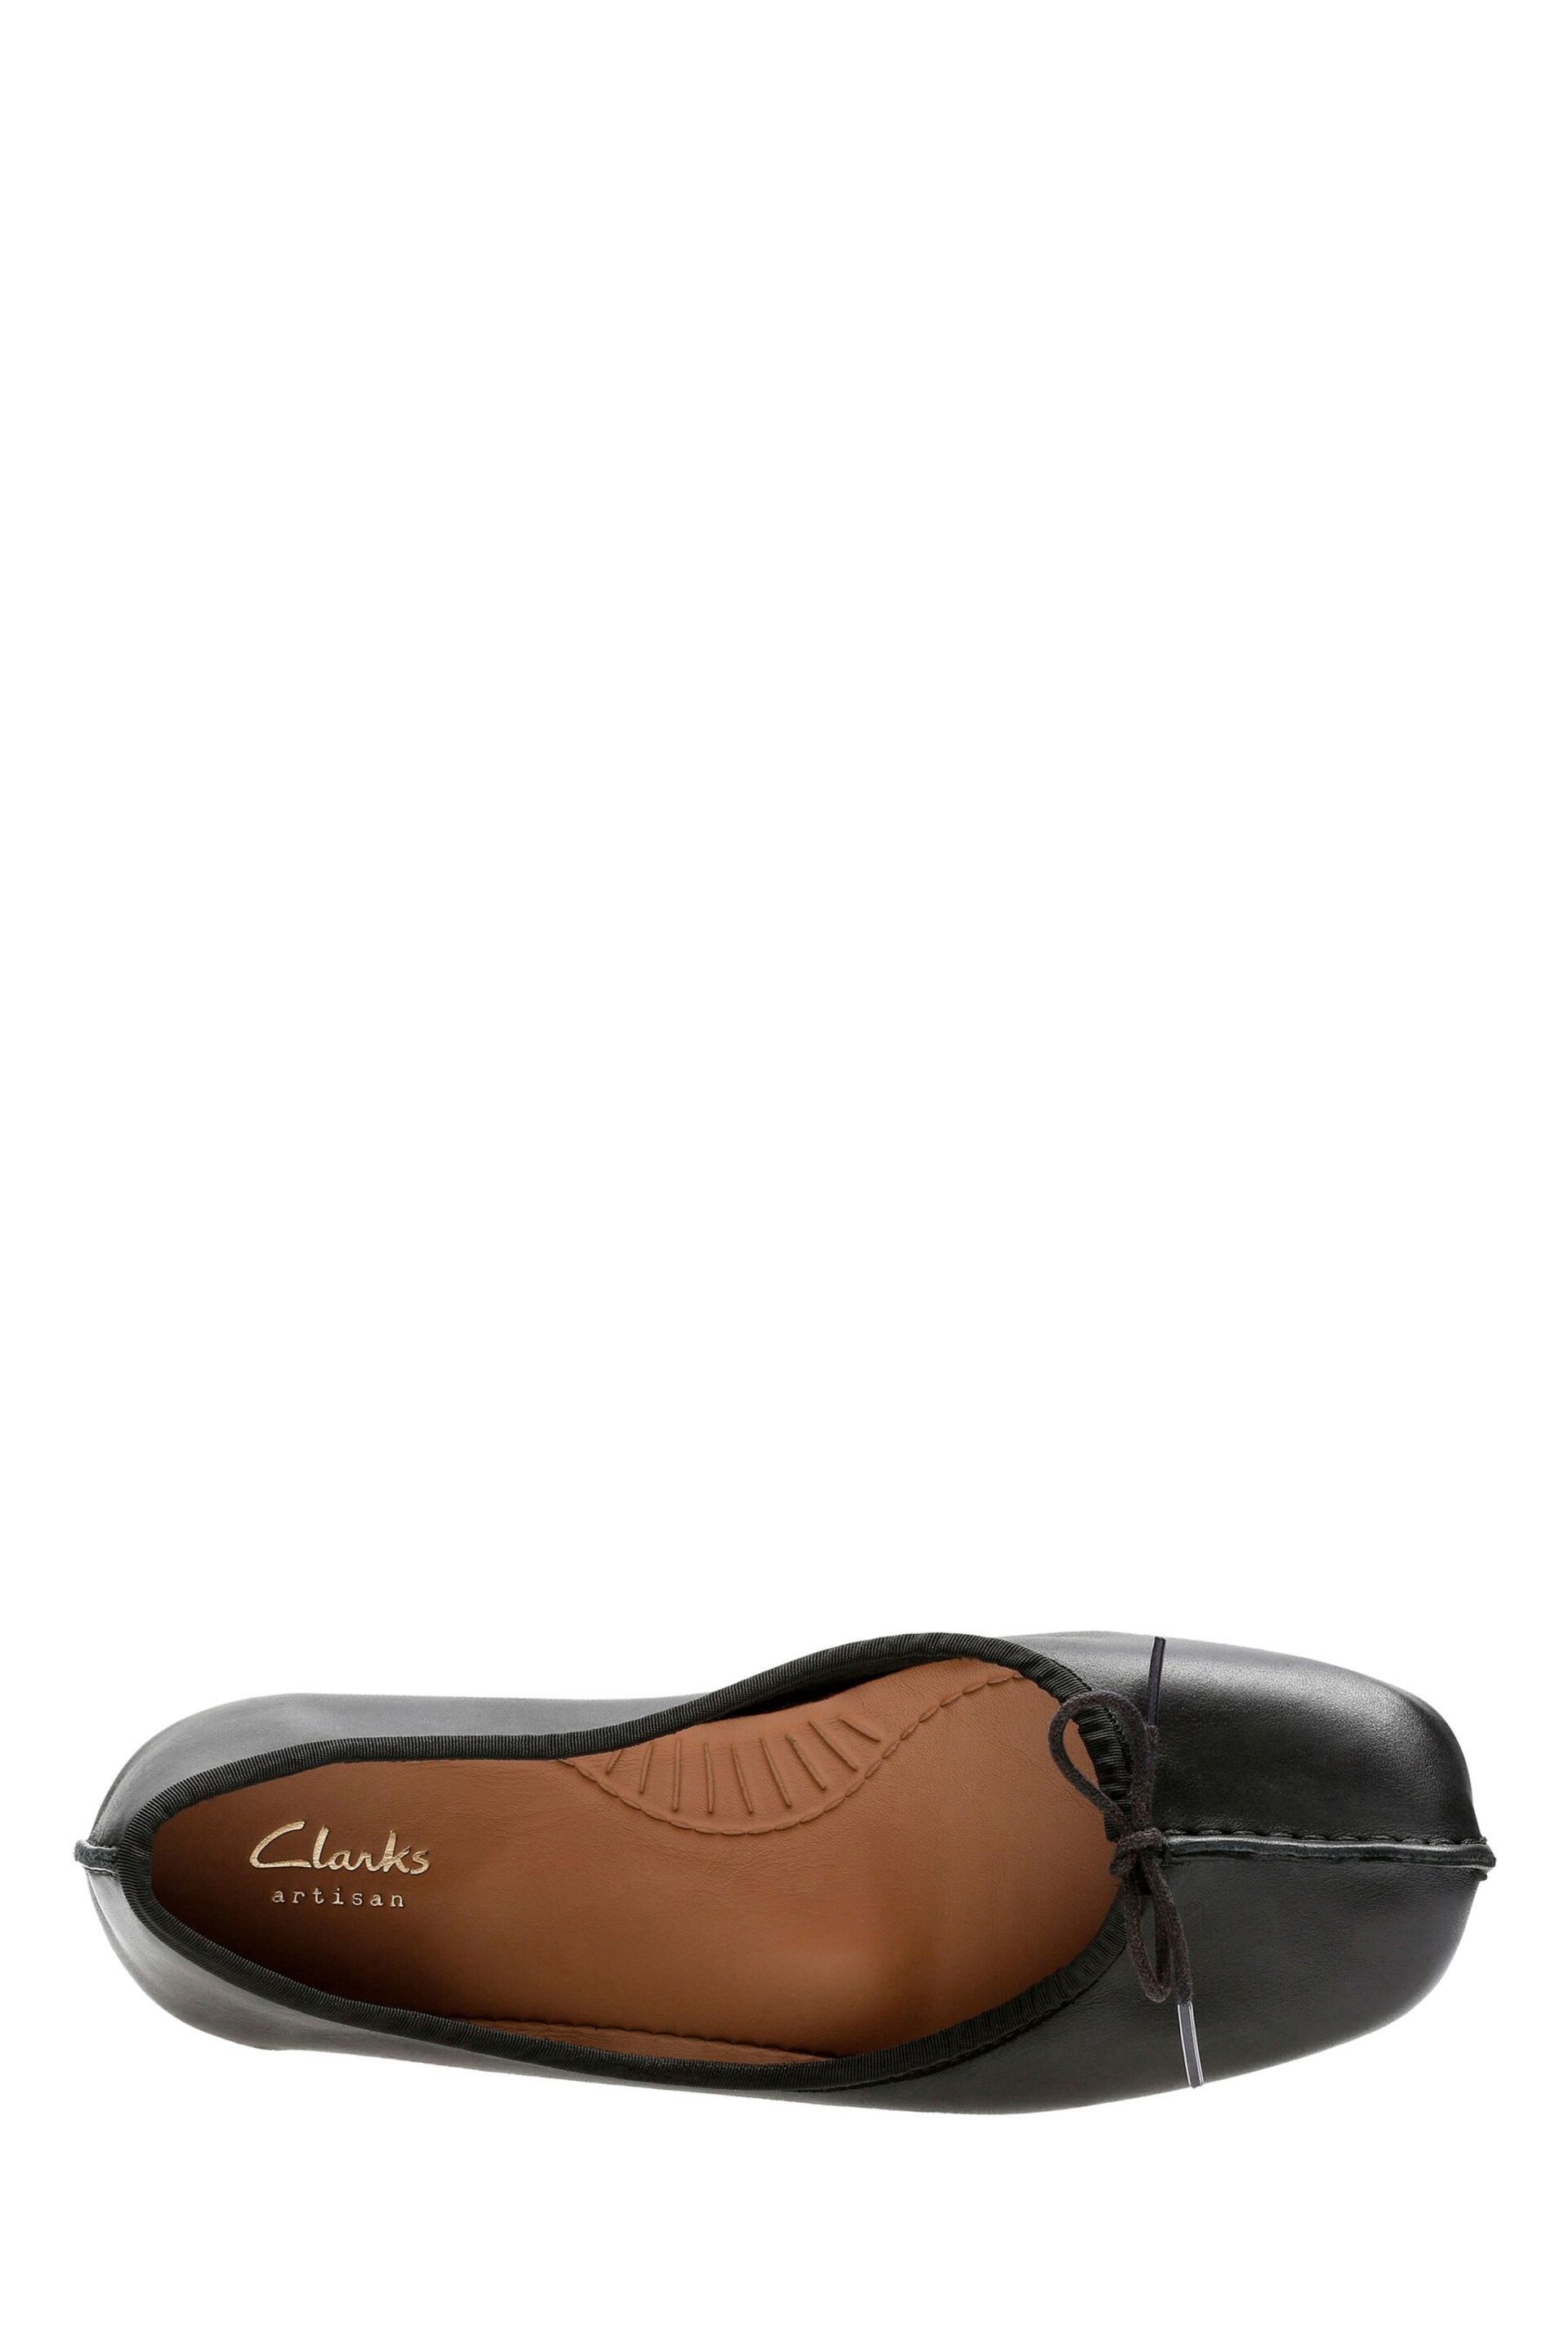 Clarks Black Leather Freckle Ice Shoes - Image 6 of 7